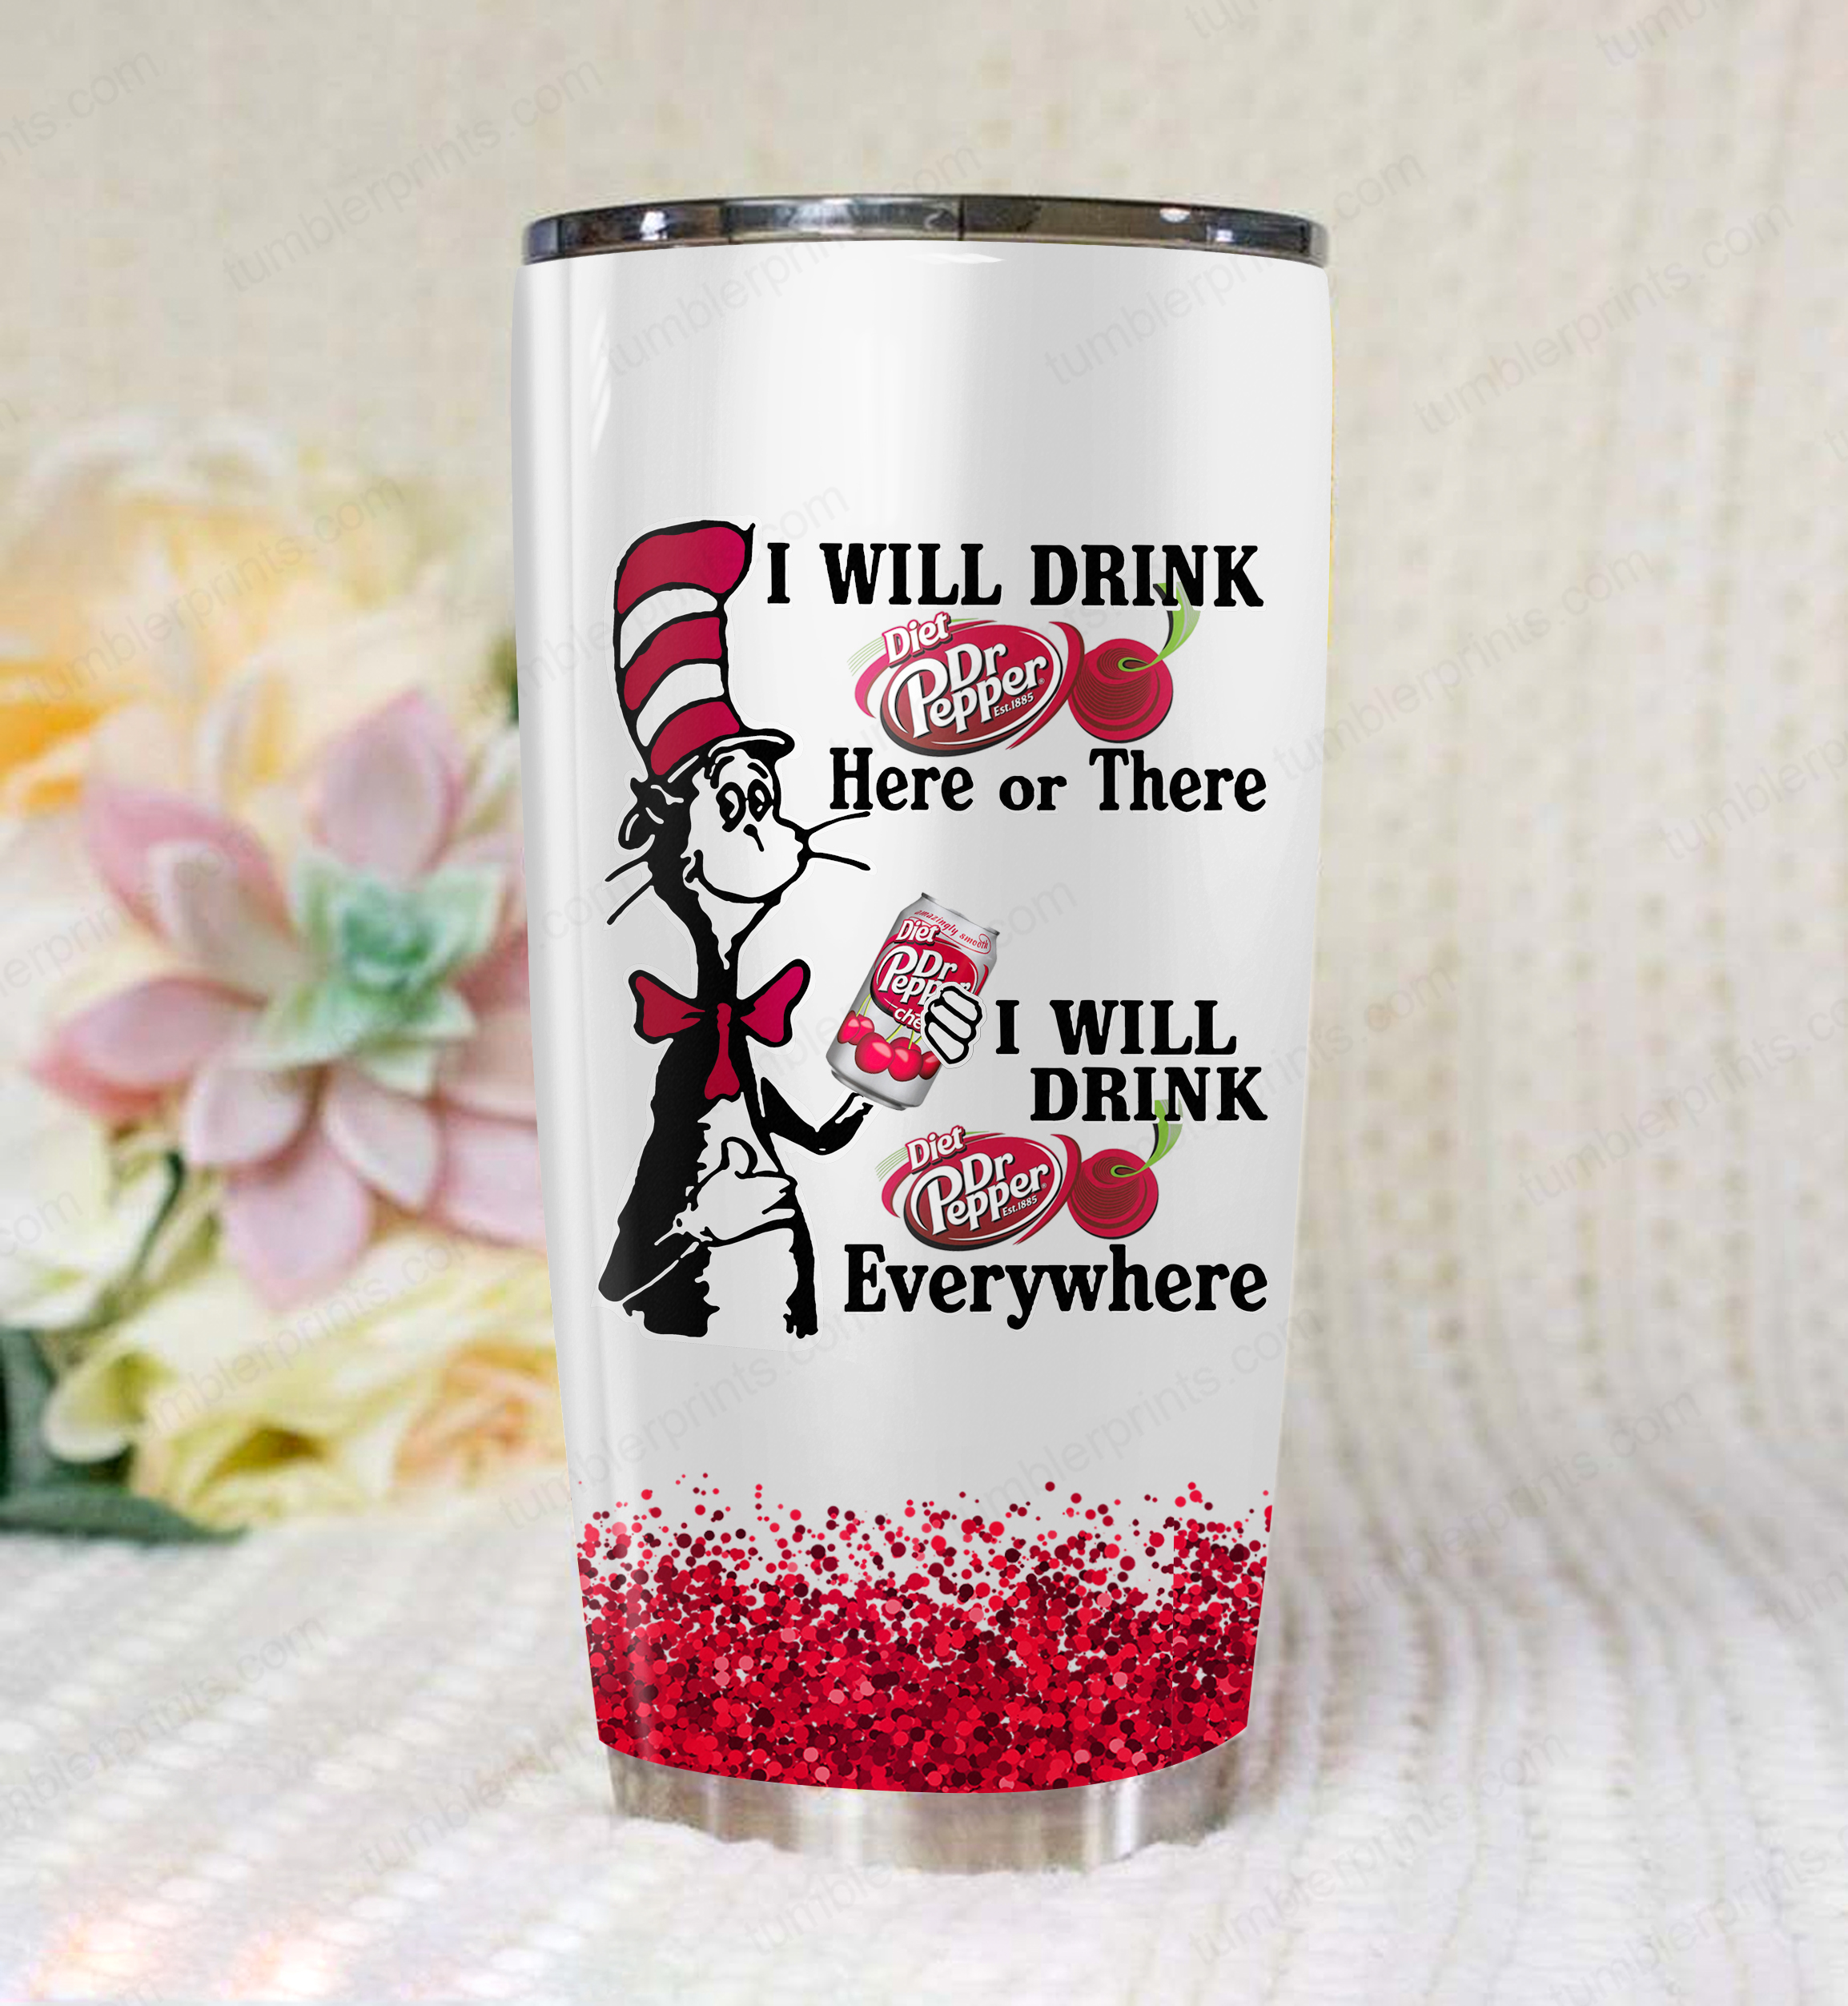 Dr seuss i will drink dr pepper cherry all over printed tumbler 3